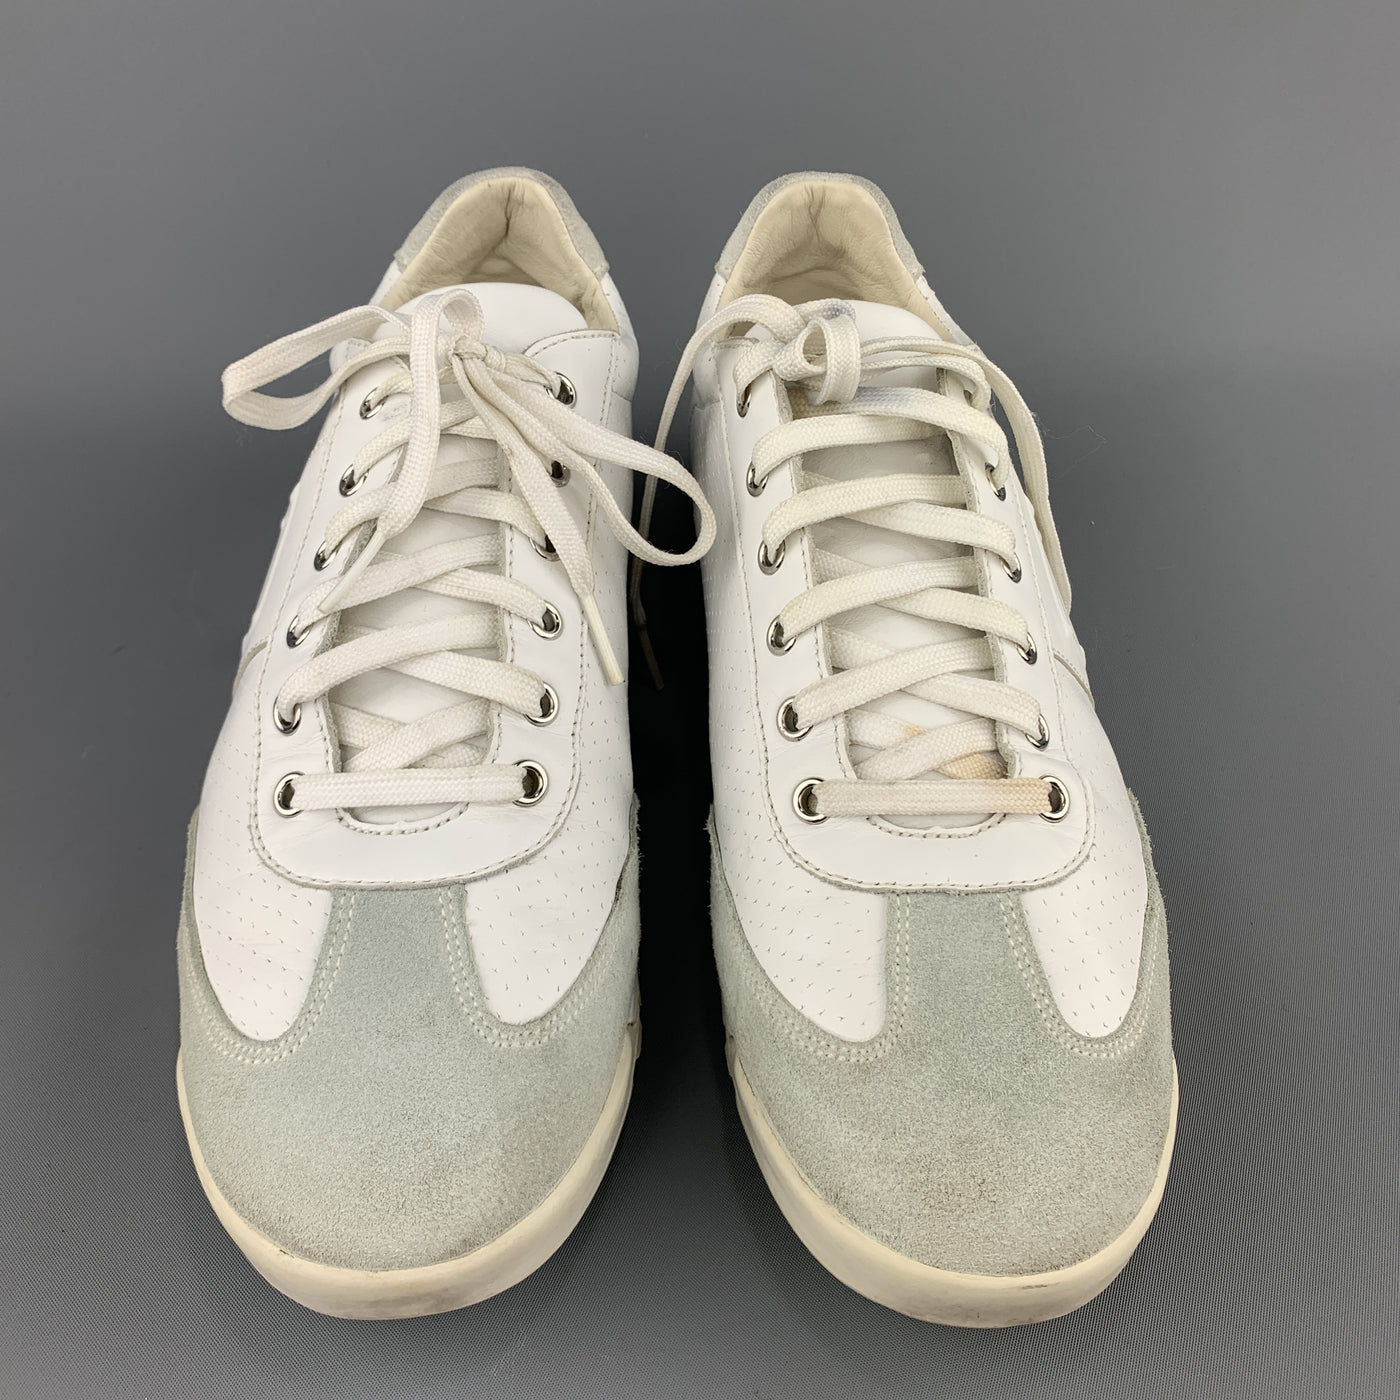 DOLCE & GABBANA Size 9 White Leather & Gray Suede Lace Up Sneakers